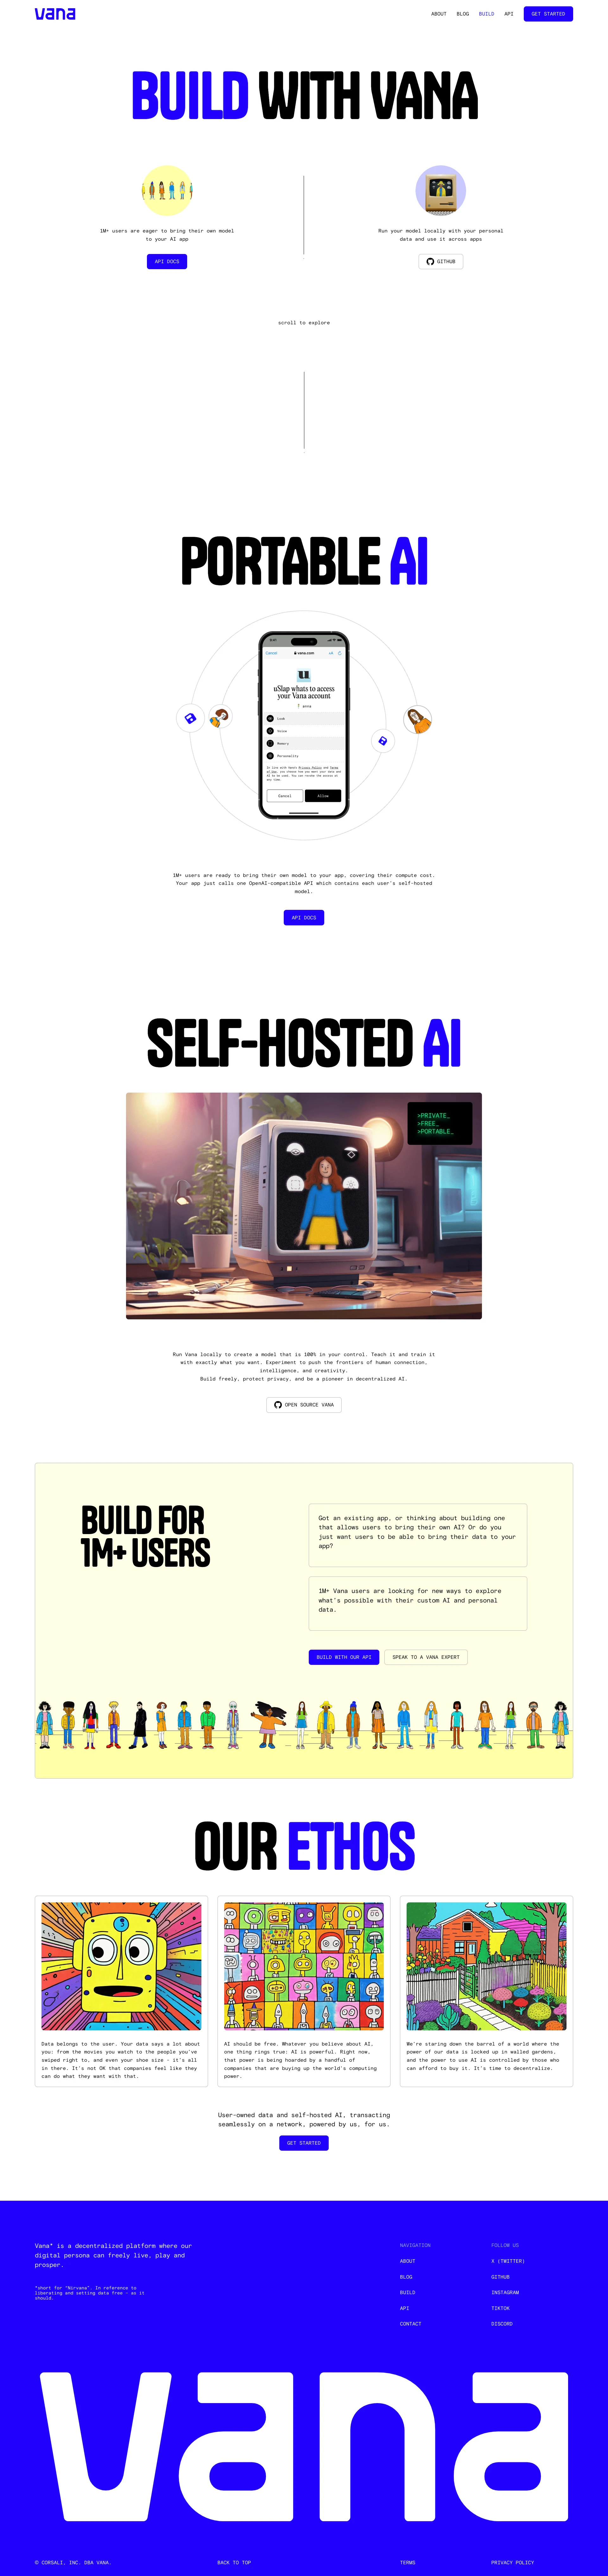 Vana Landing Page Example: Explore your digital identity with Vana's ecosystem of personalized AI applications. Join an active community of builders and creators!